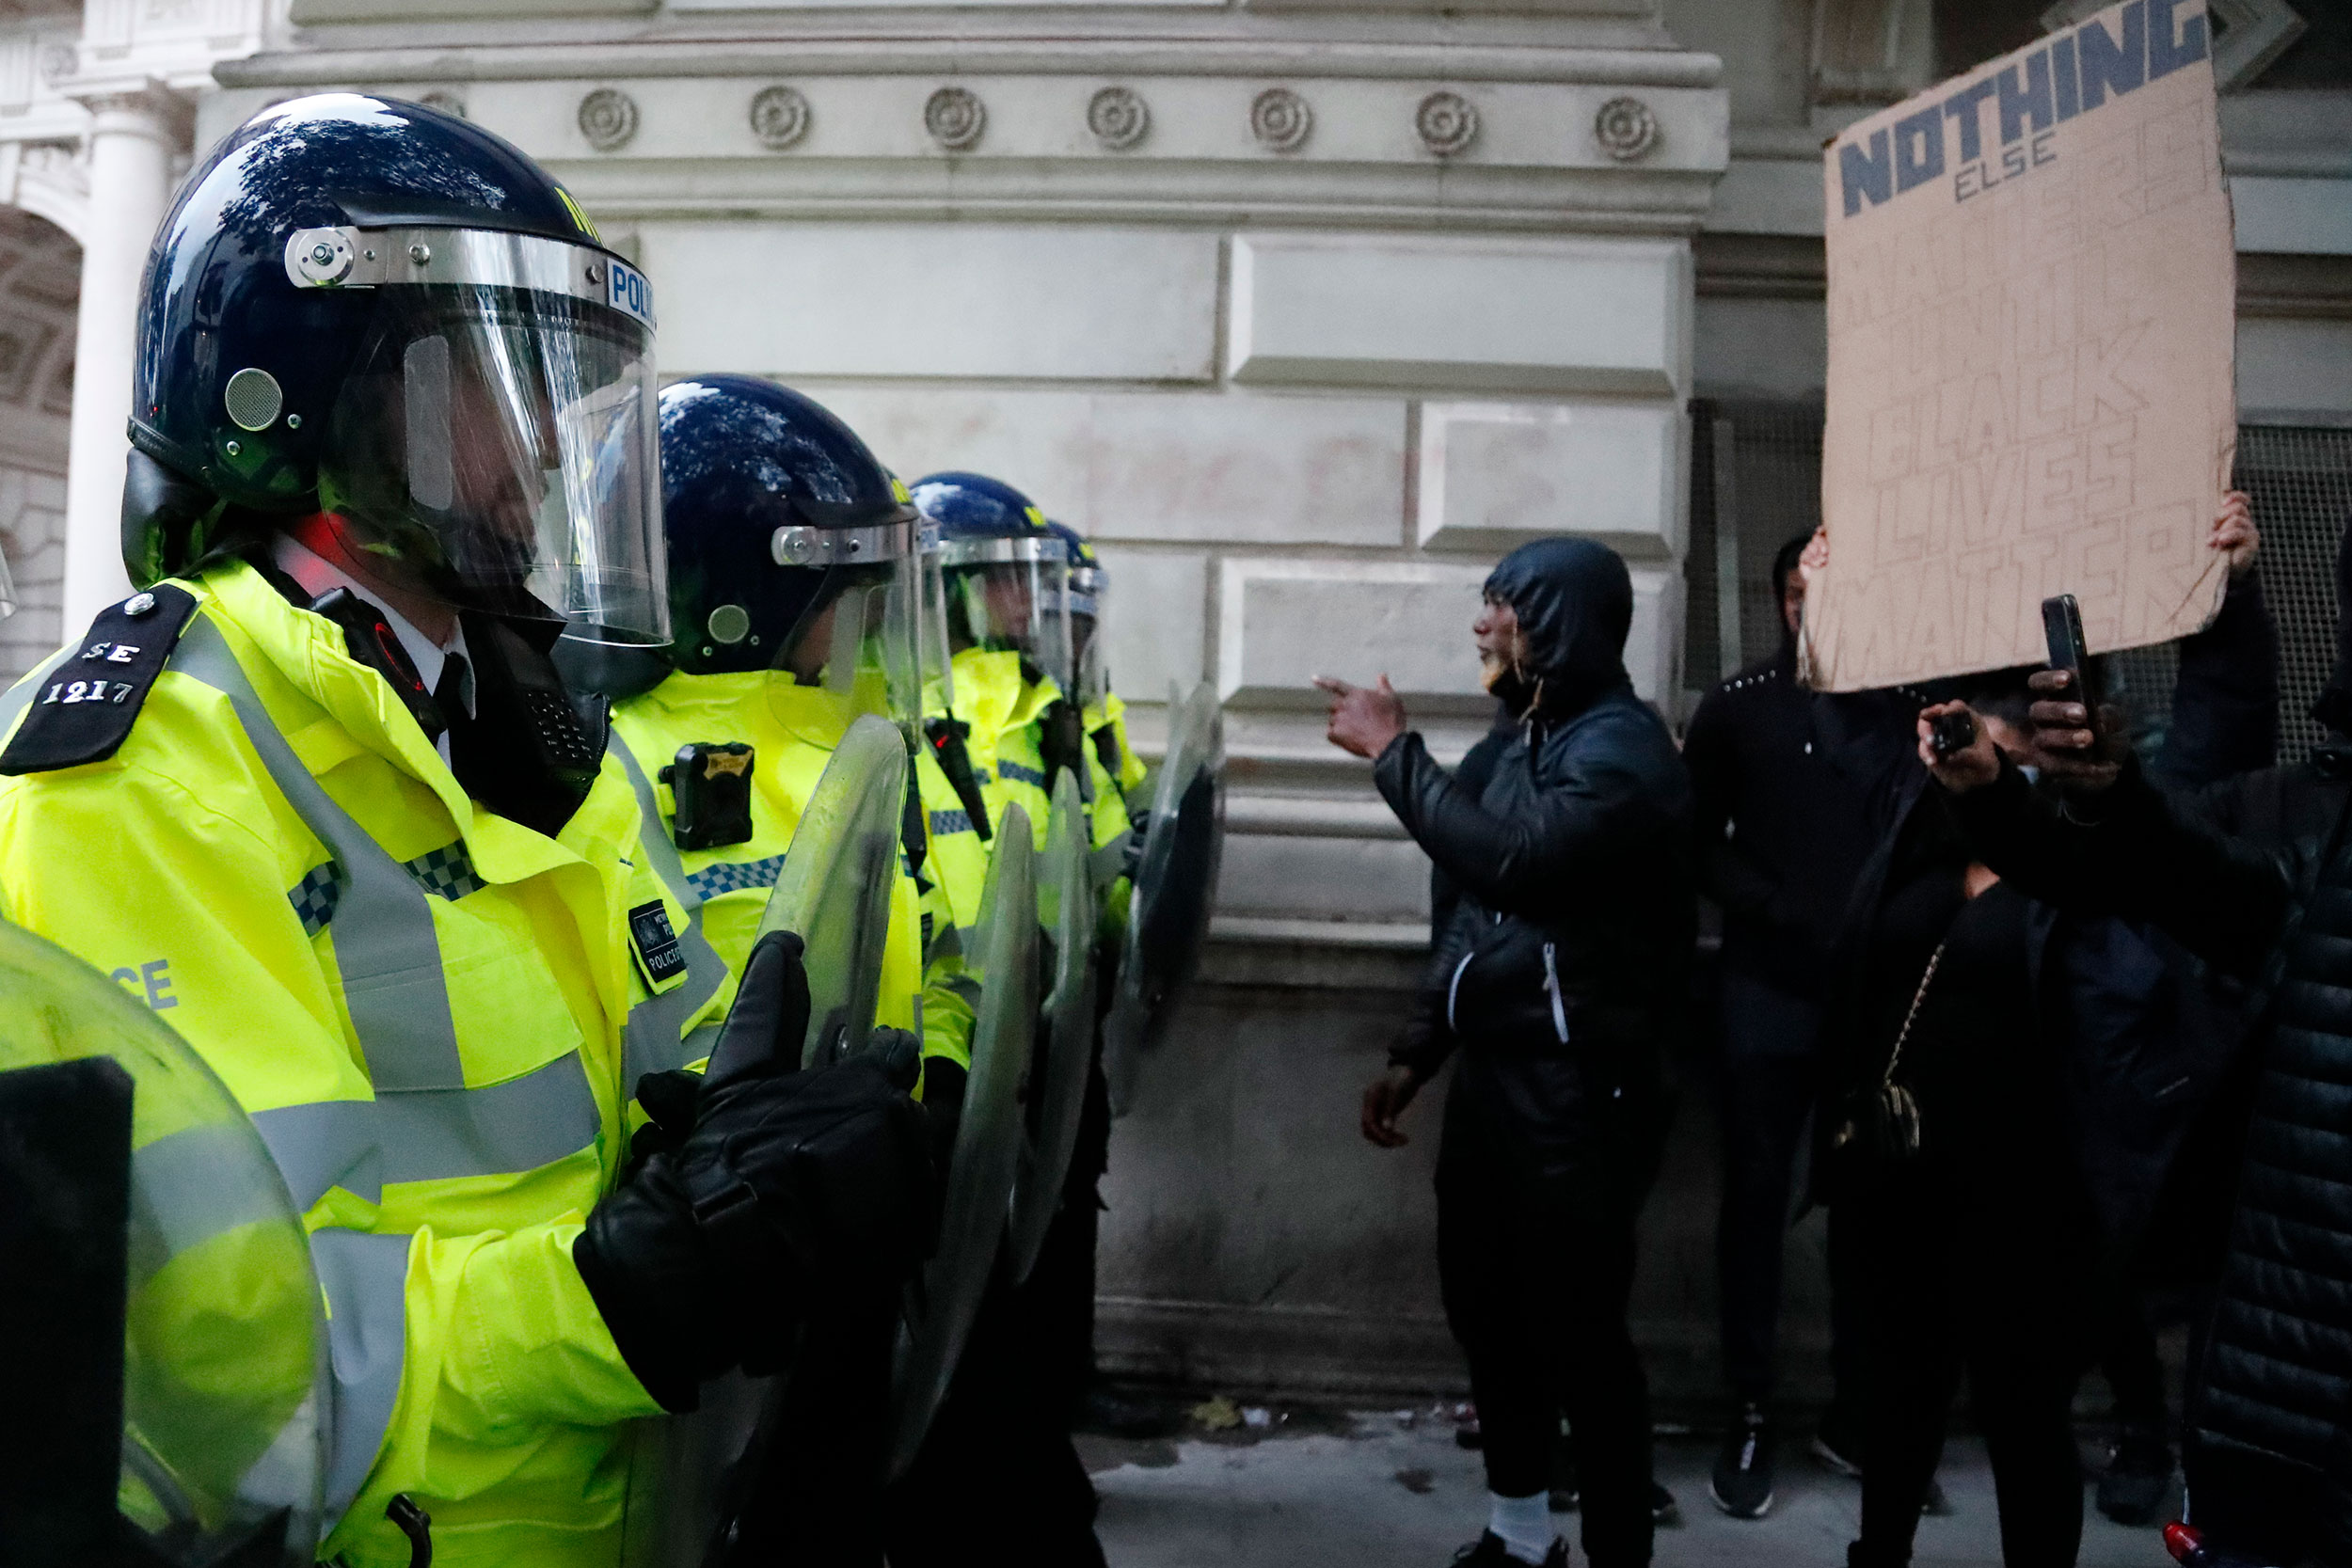 Police confront protesters during the Black Lives Matter rally in London on Sunday, June 7.